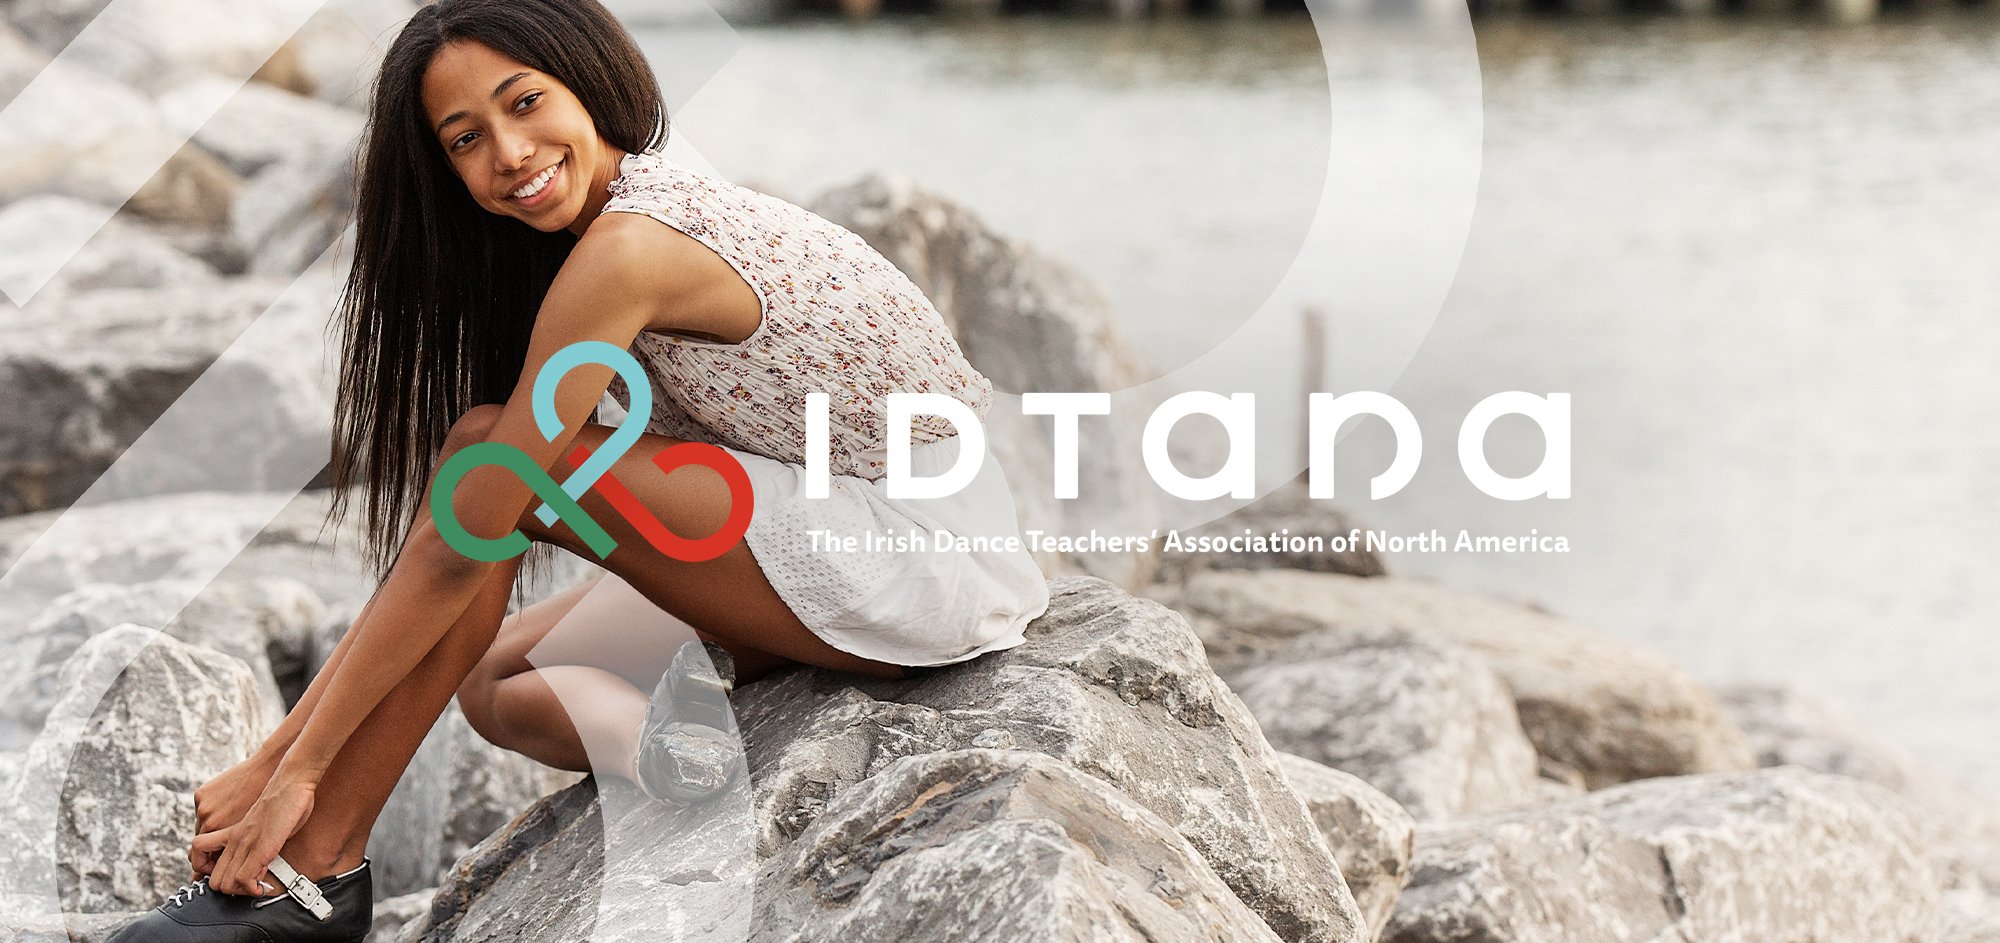 A picture of a girl tying her Irish dance shoes while sitting on rocks near the East River in New York. There is an overlay of the IDTANA logo on top.